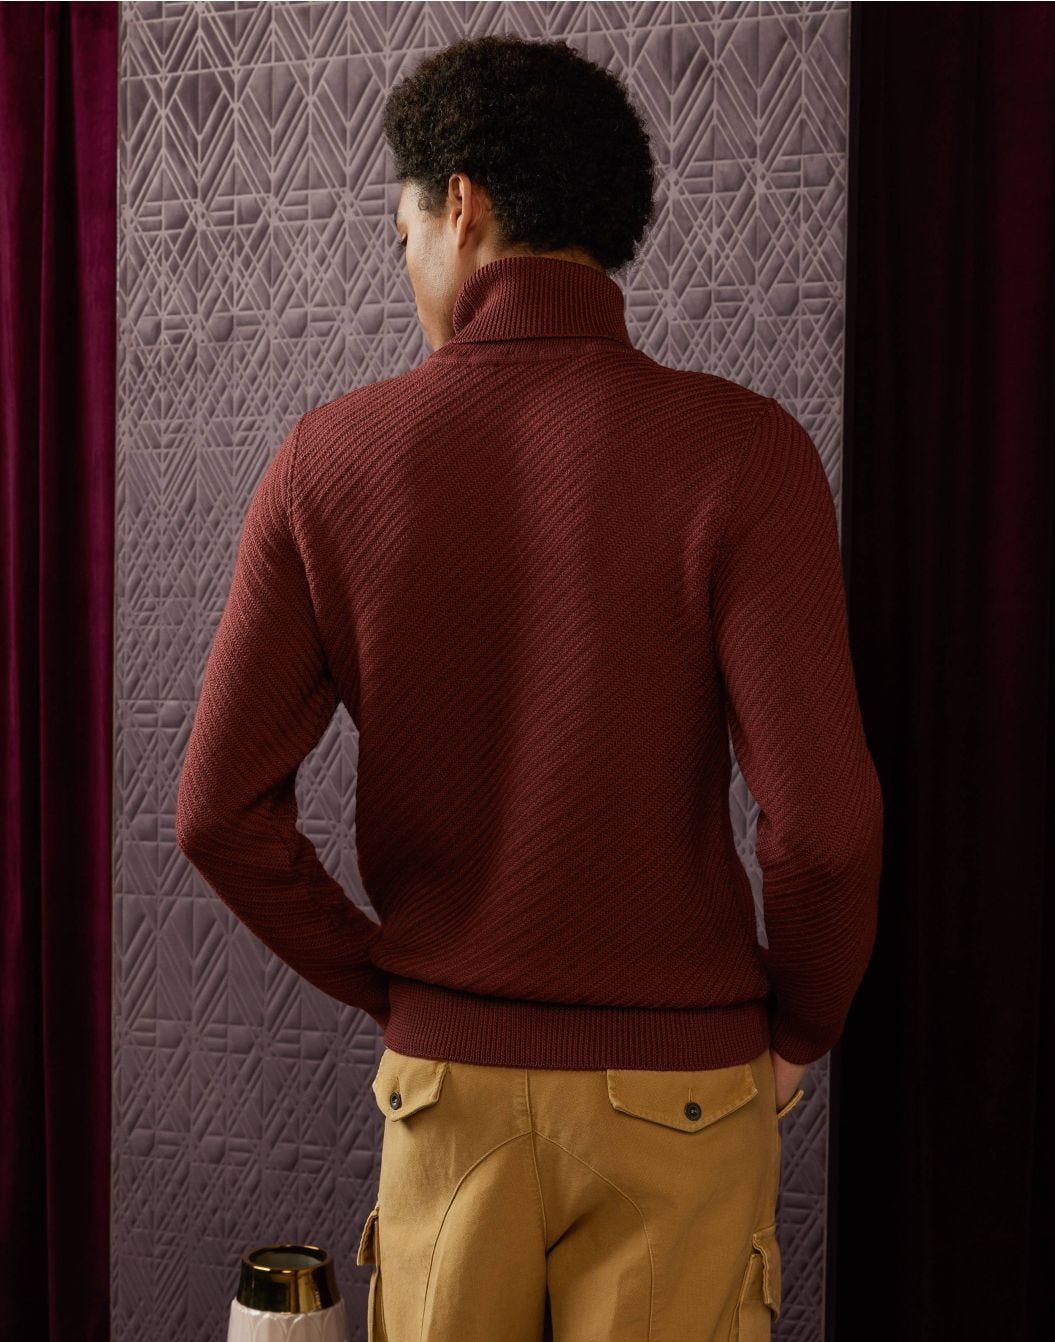 Turtleneck in worsted wool with a diagonal jacquard pattern